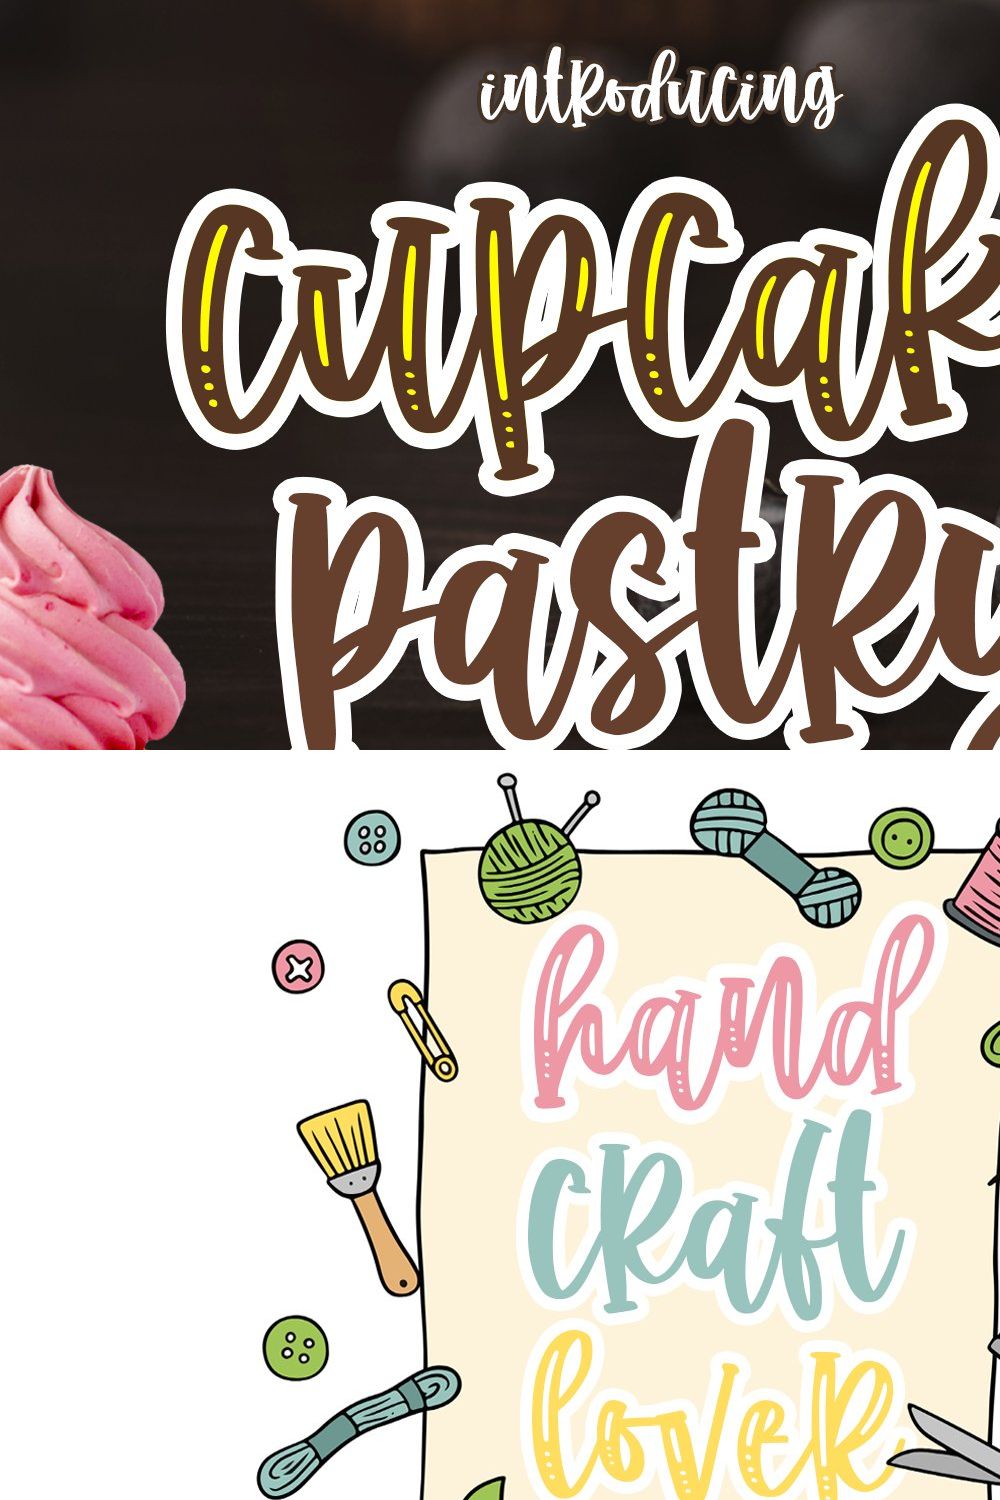 Cupcake Pastry pinterest preview image.